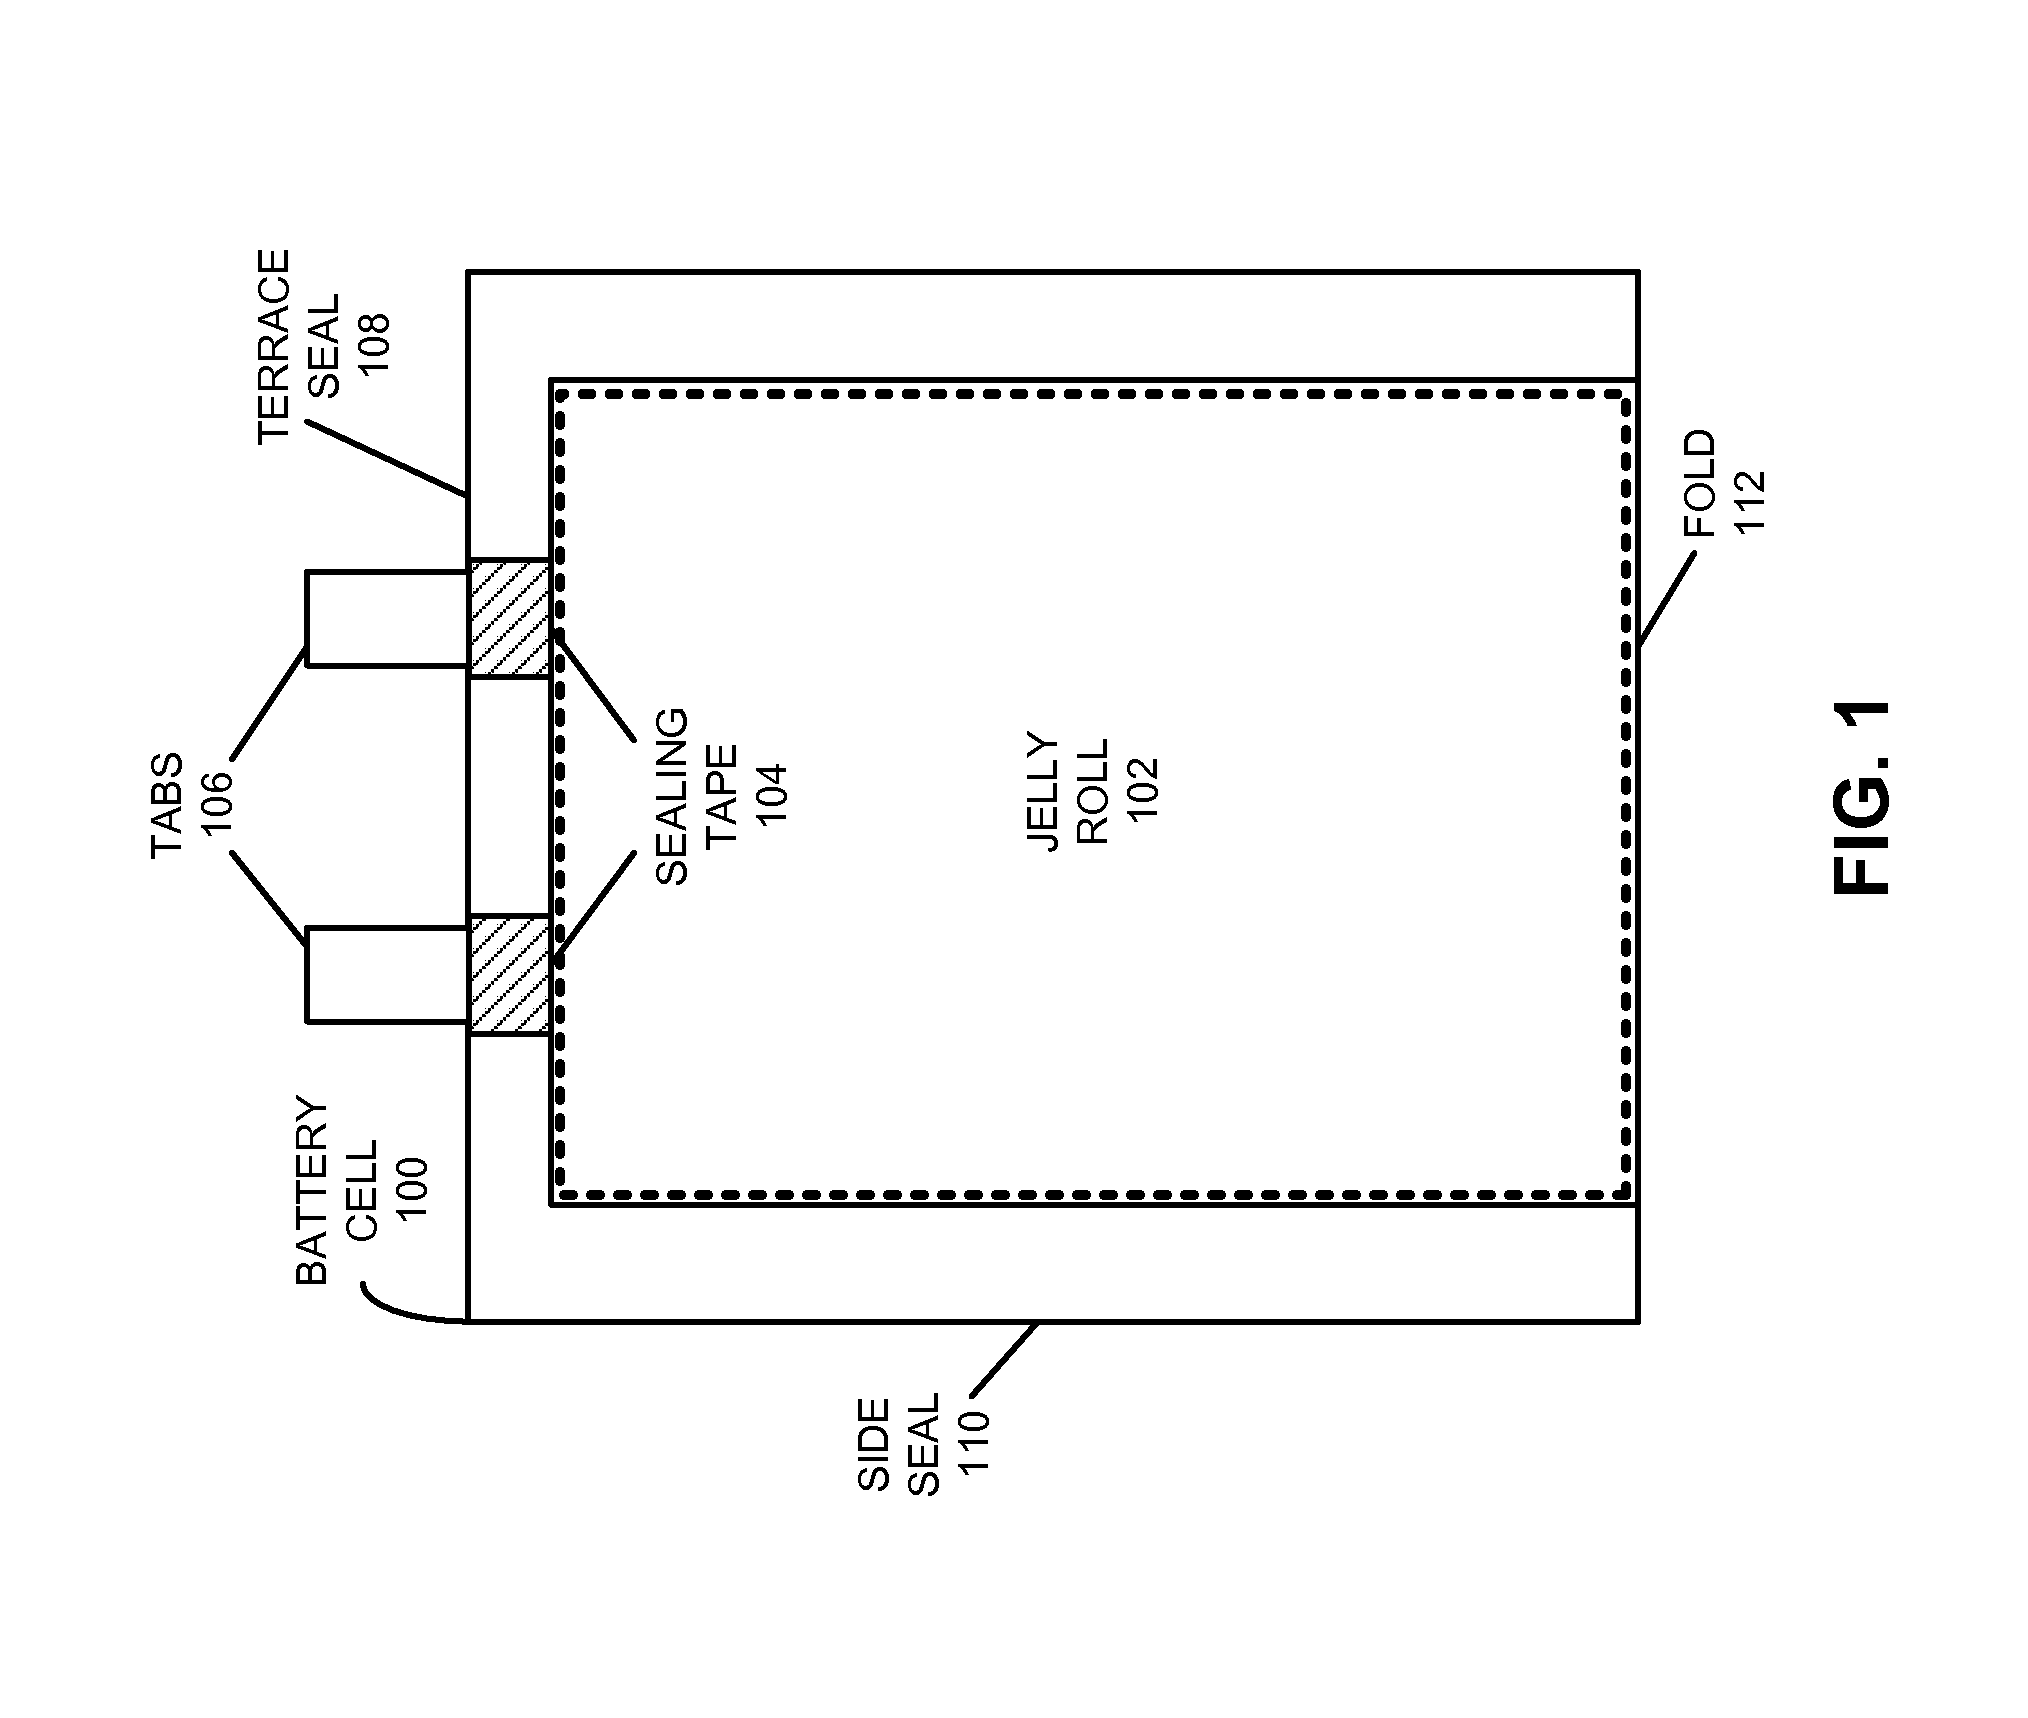 Rechargeable battery with a jelly roll having multiple thicknesses